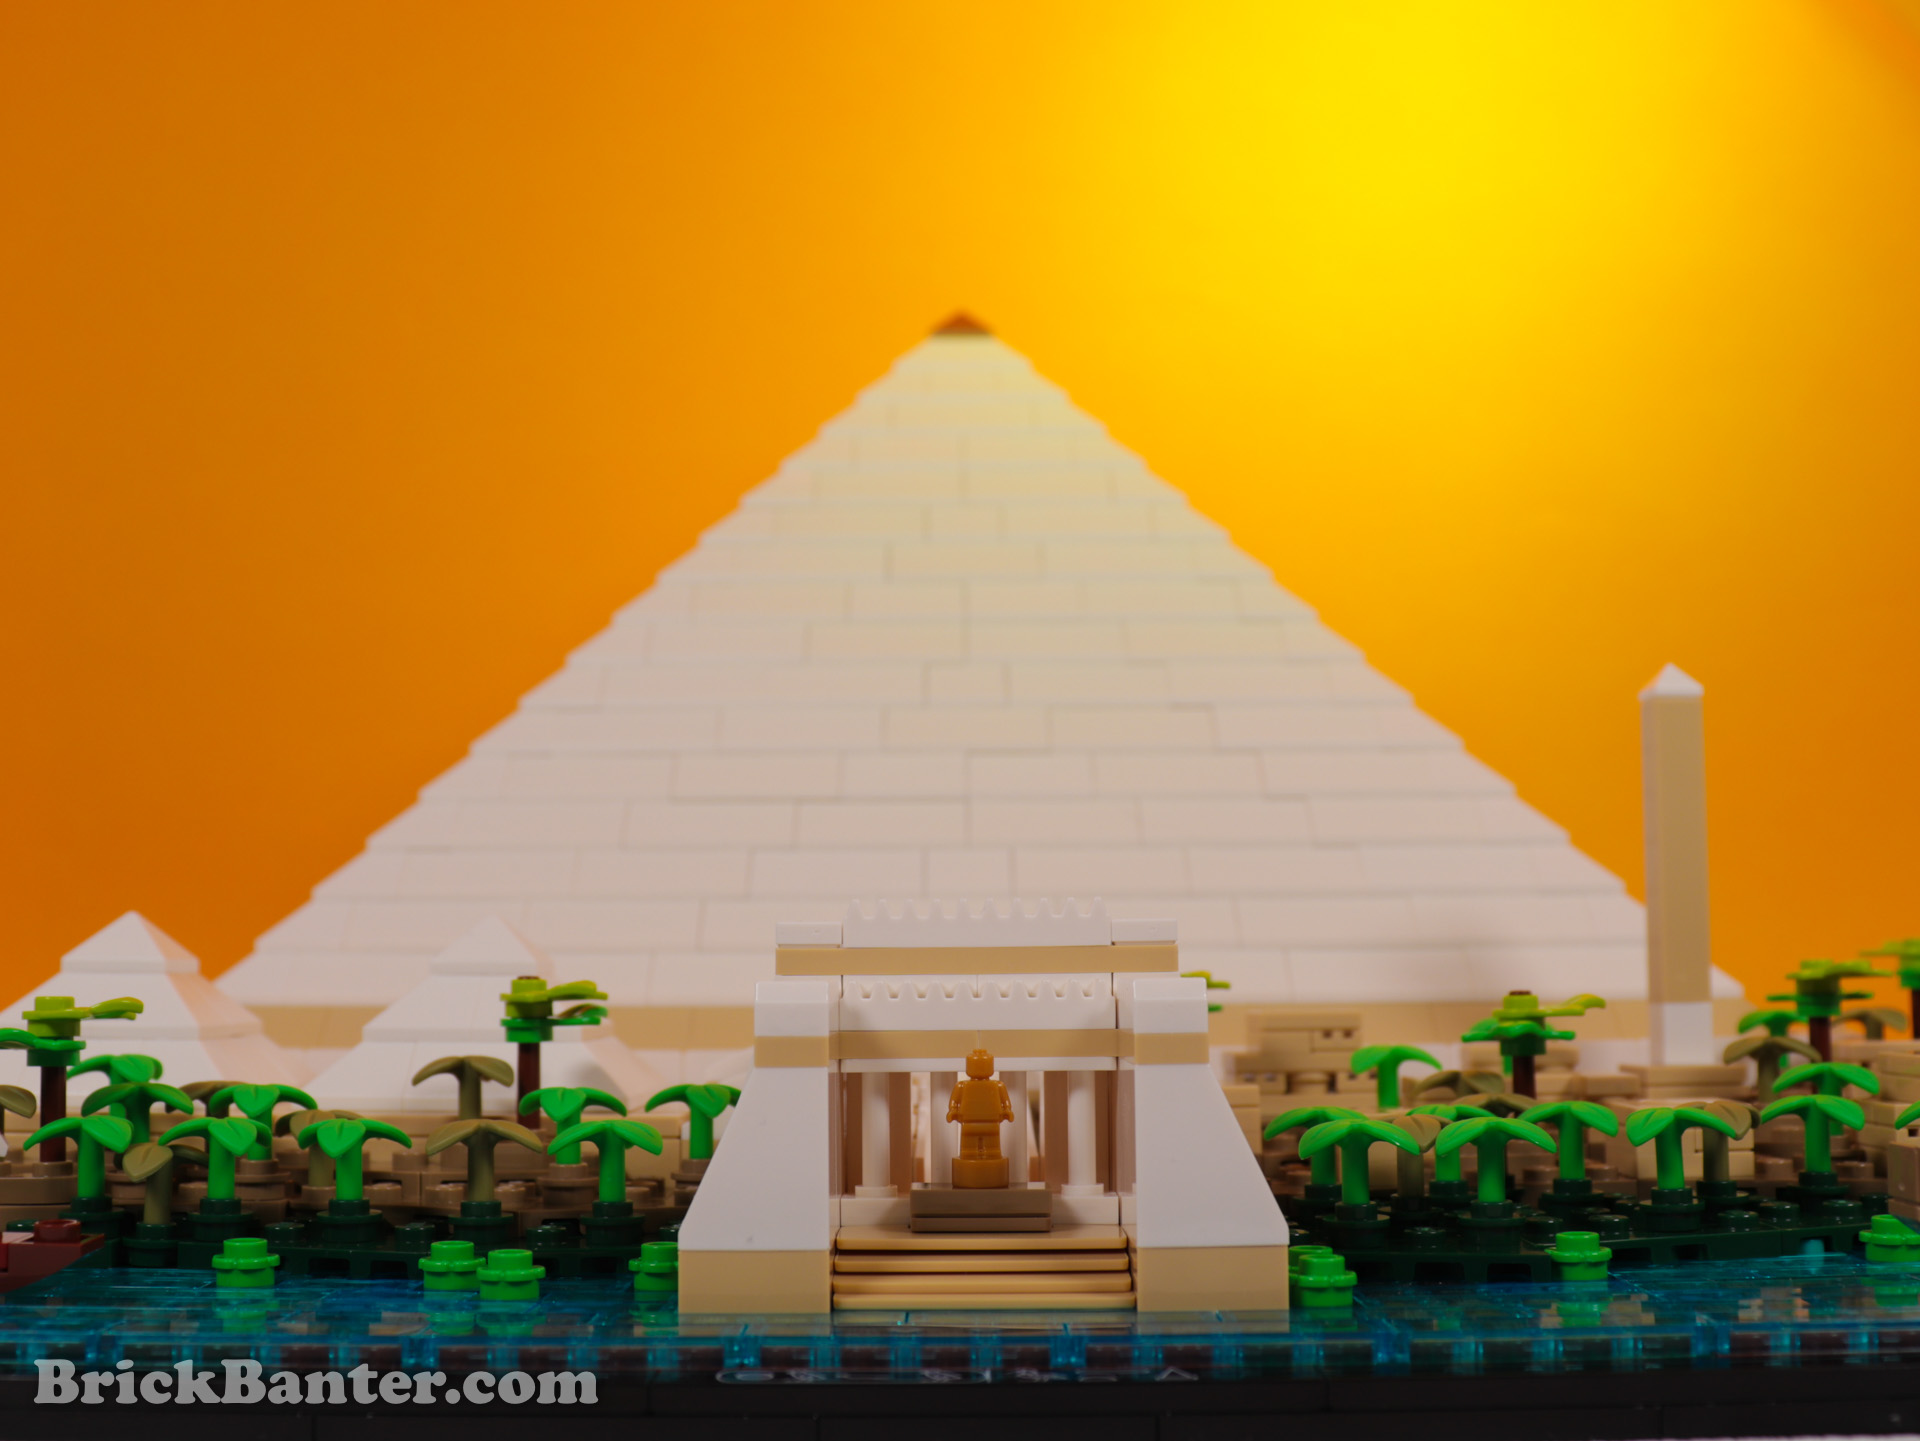 LEGO 21058 - Architecture - Great Pyramid Of Giza - Review Brick Banter